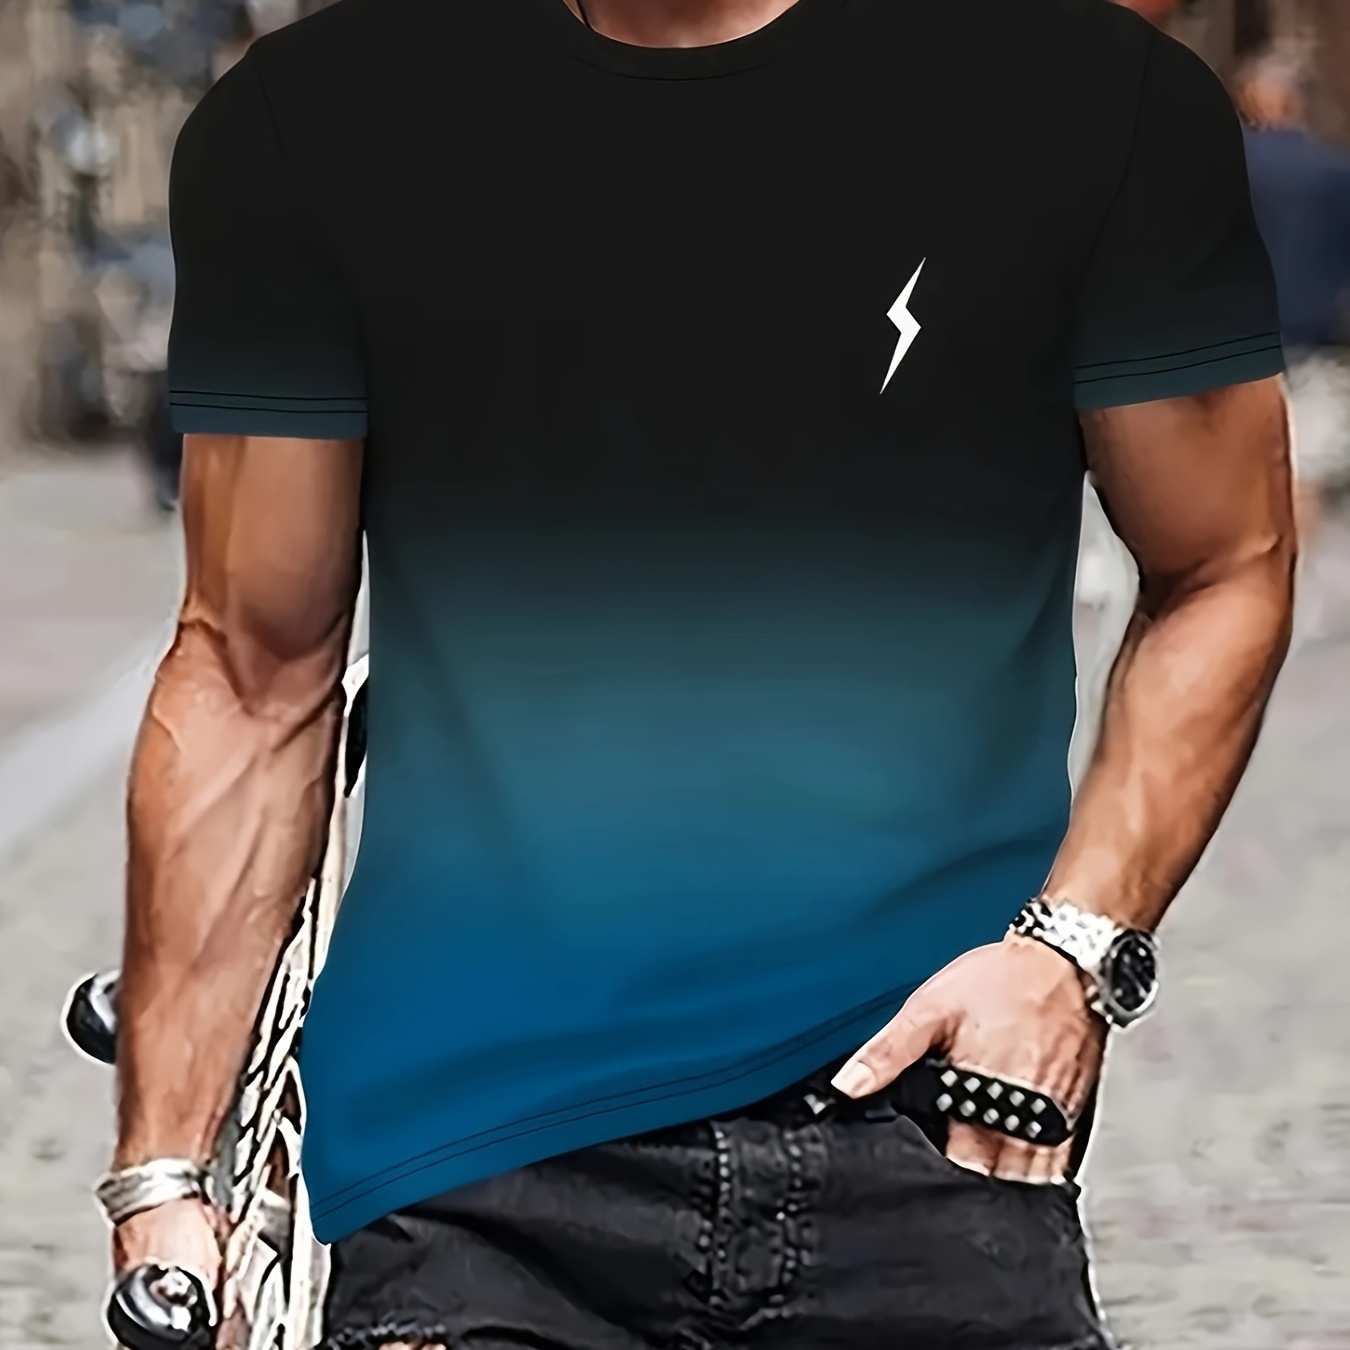 

Gradient Color And Graphic Pattern T-shirt With Crew Neck And Short Sleeve, Casual And Chic Tops For Men's Summer Outdoors Wear